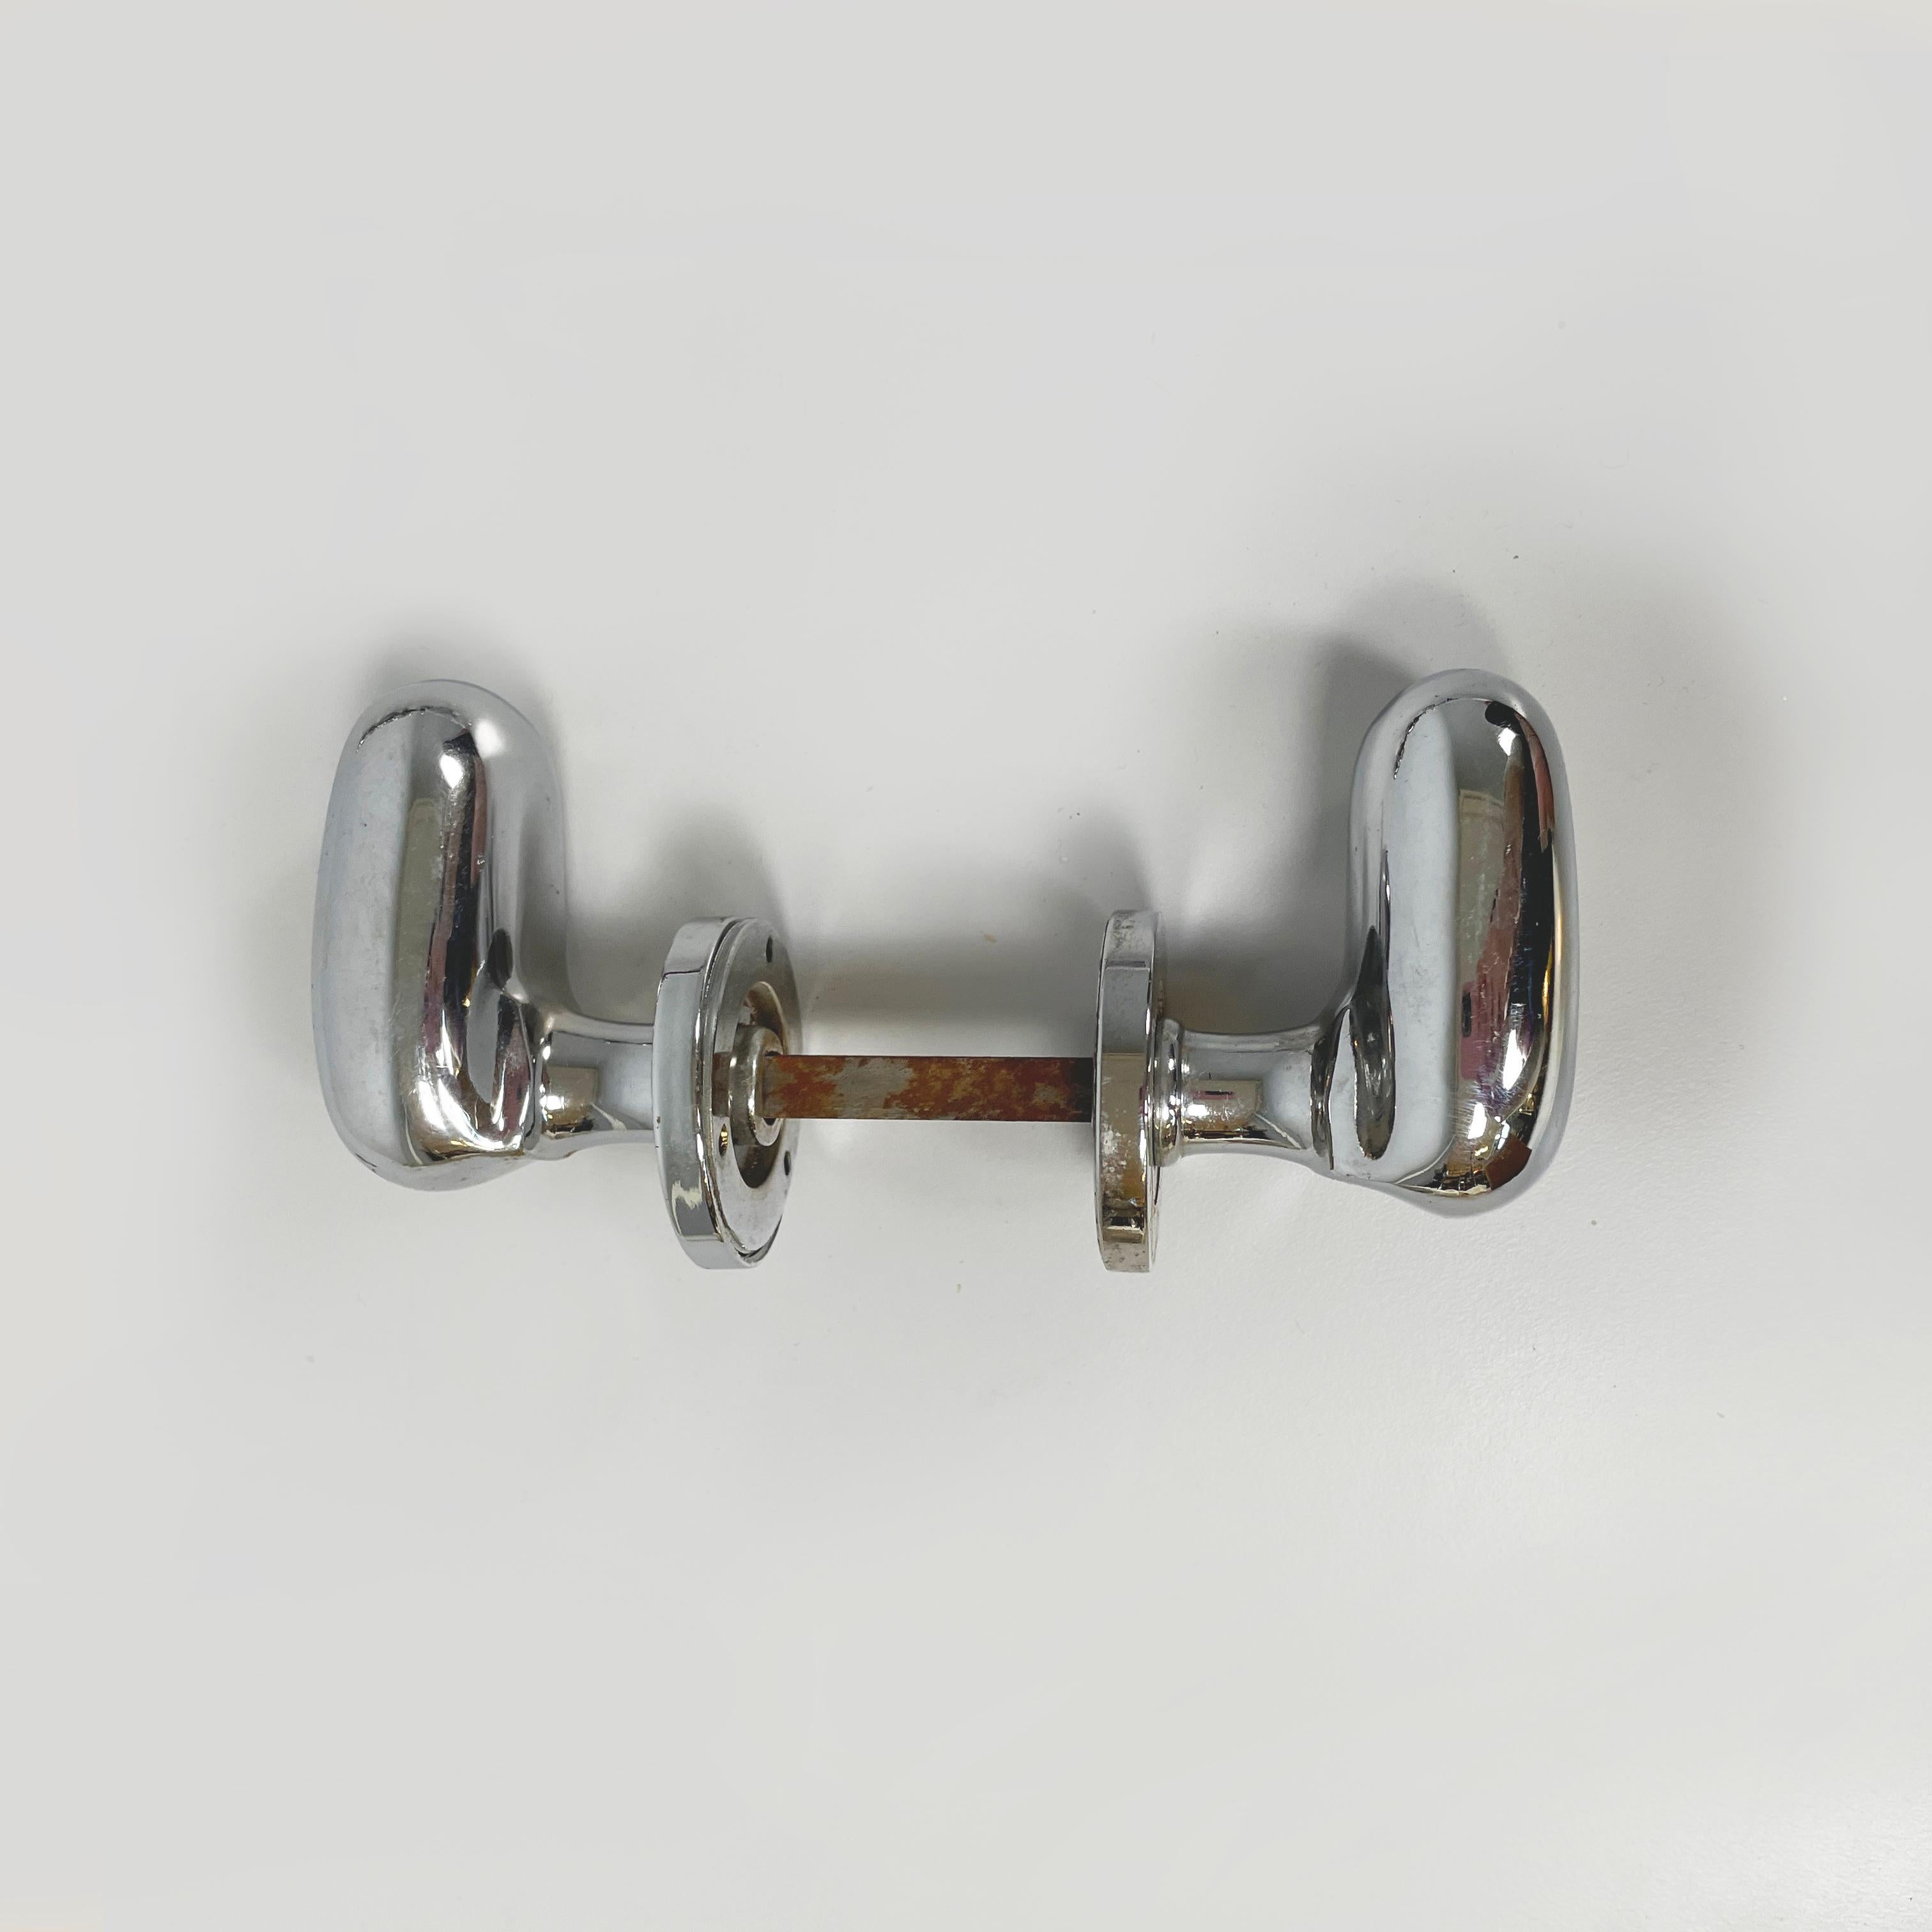 Mid-Century Modern Italian mid-century metal handles and locks by Caccia Dominioni Azucena, 1960s For Sale